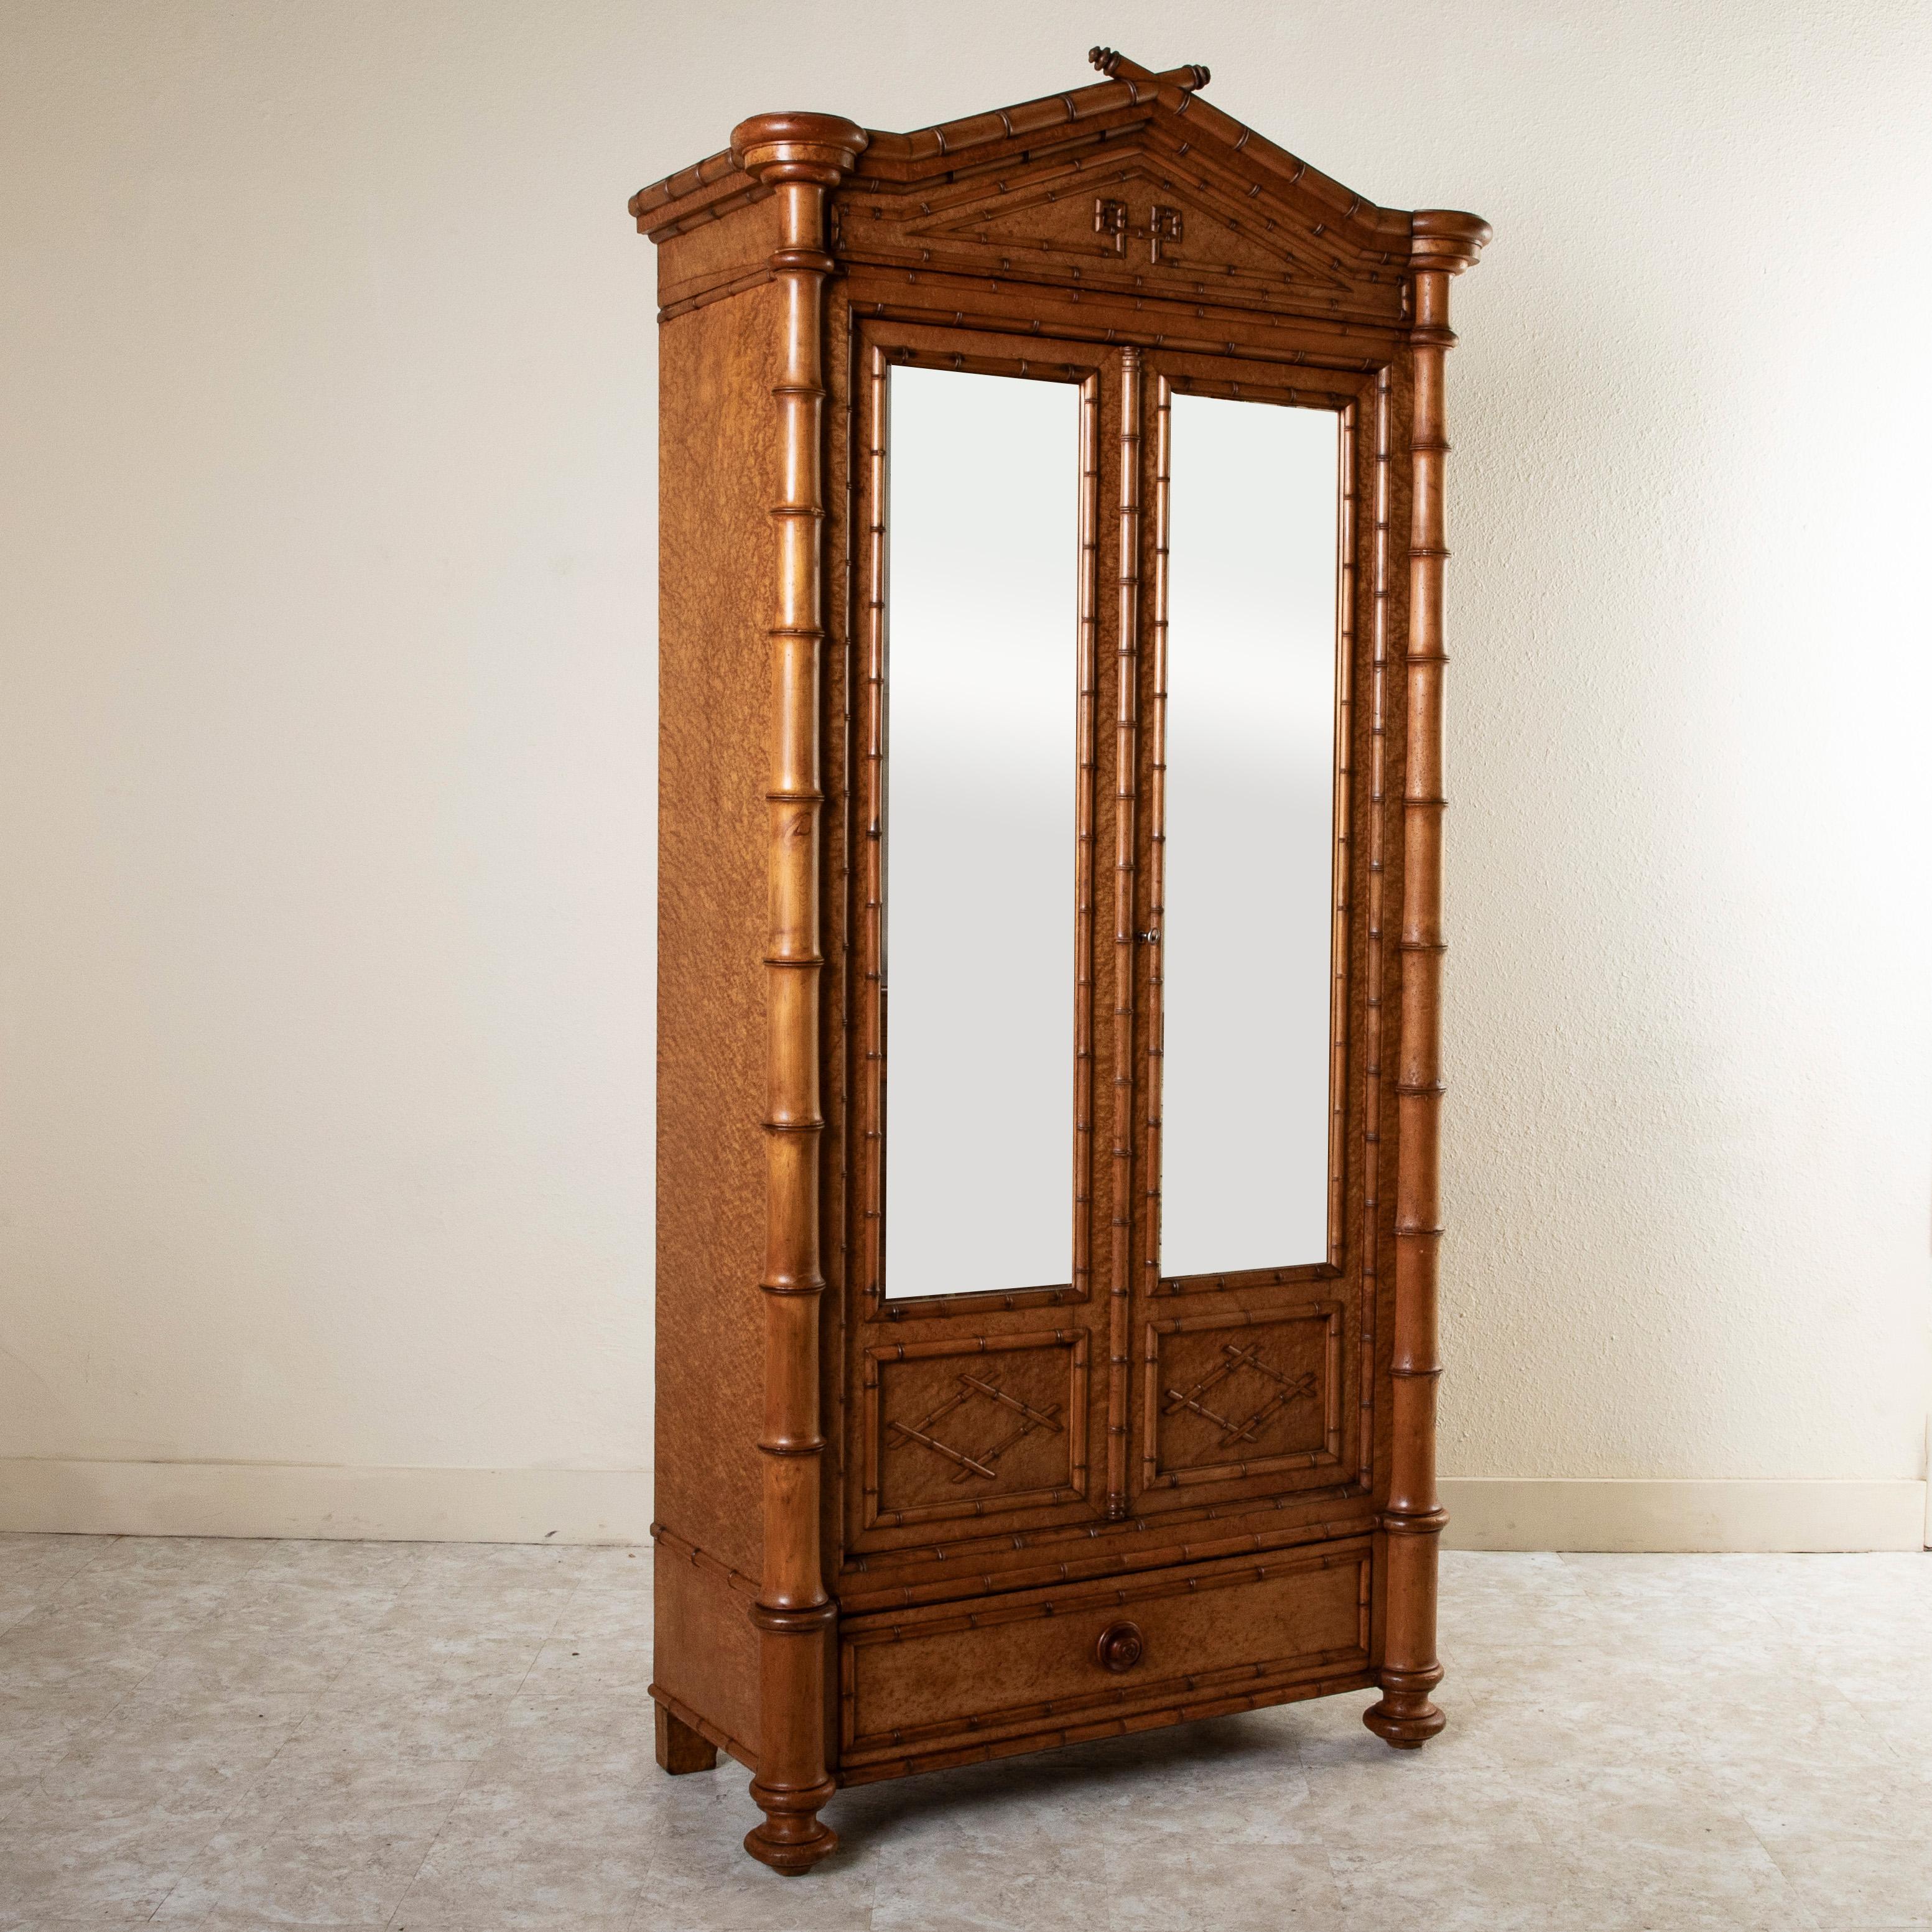 This turn of the twentieth century French faux bamboo armoire stands at an impressive height of eight feet and is constructed of cherrywood and birdseye maple. Its finely detailed bamboo pieces, harmoniously laid in a uniform pattern, blend with the